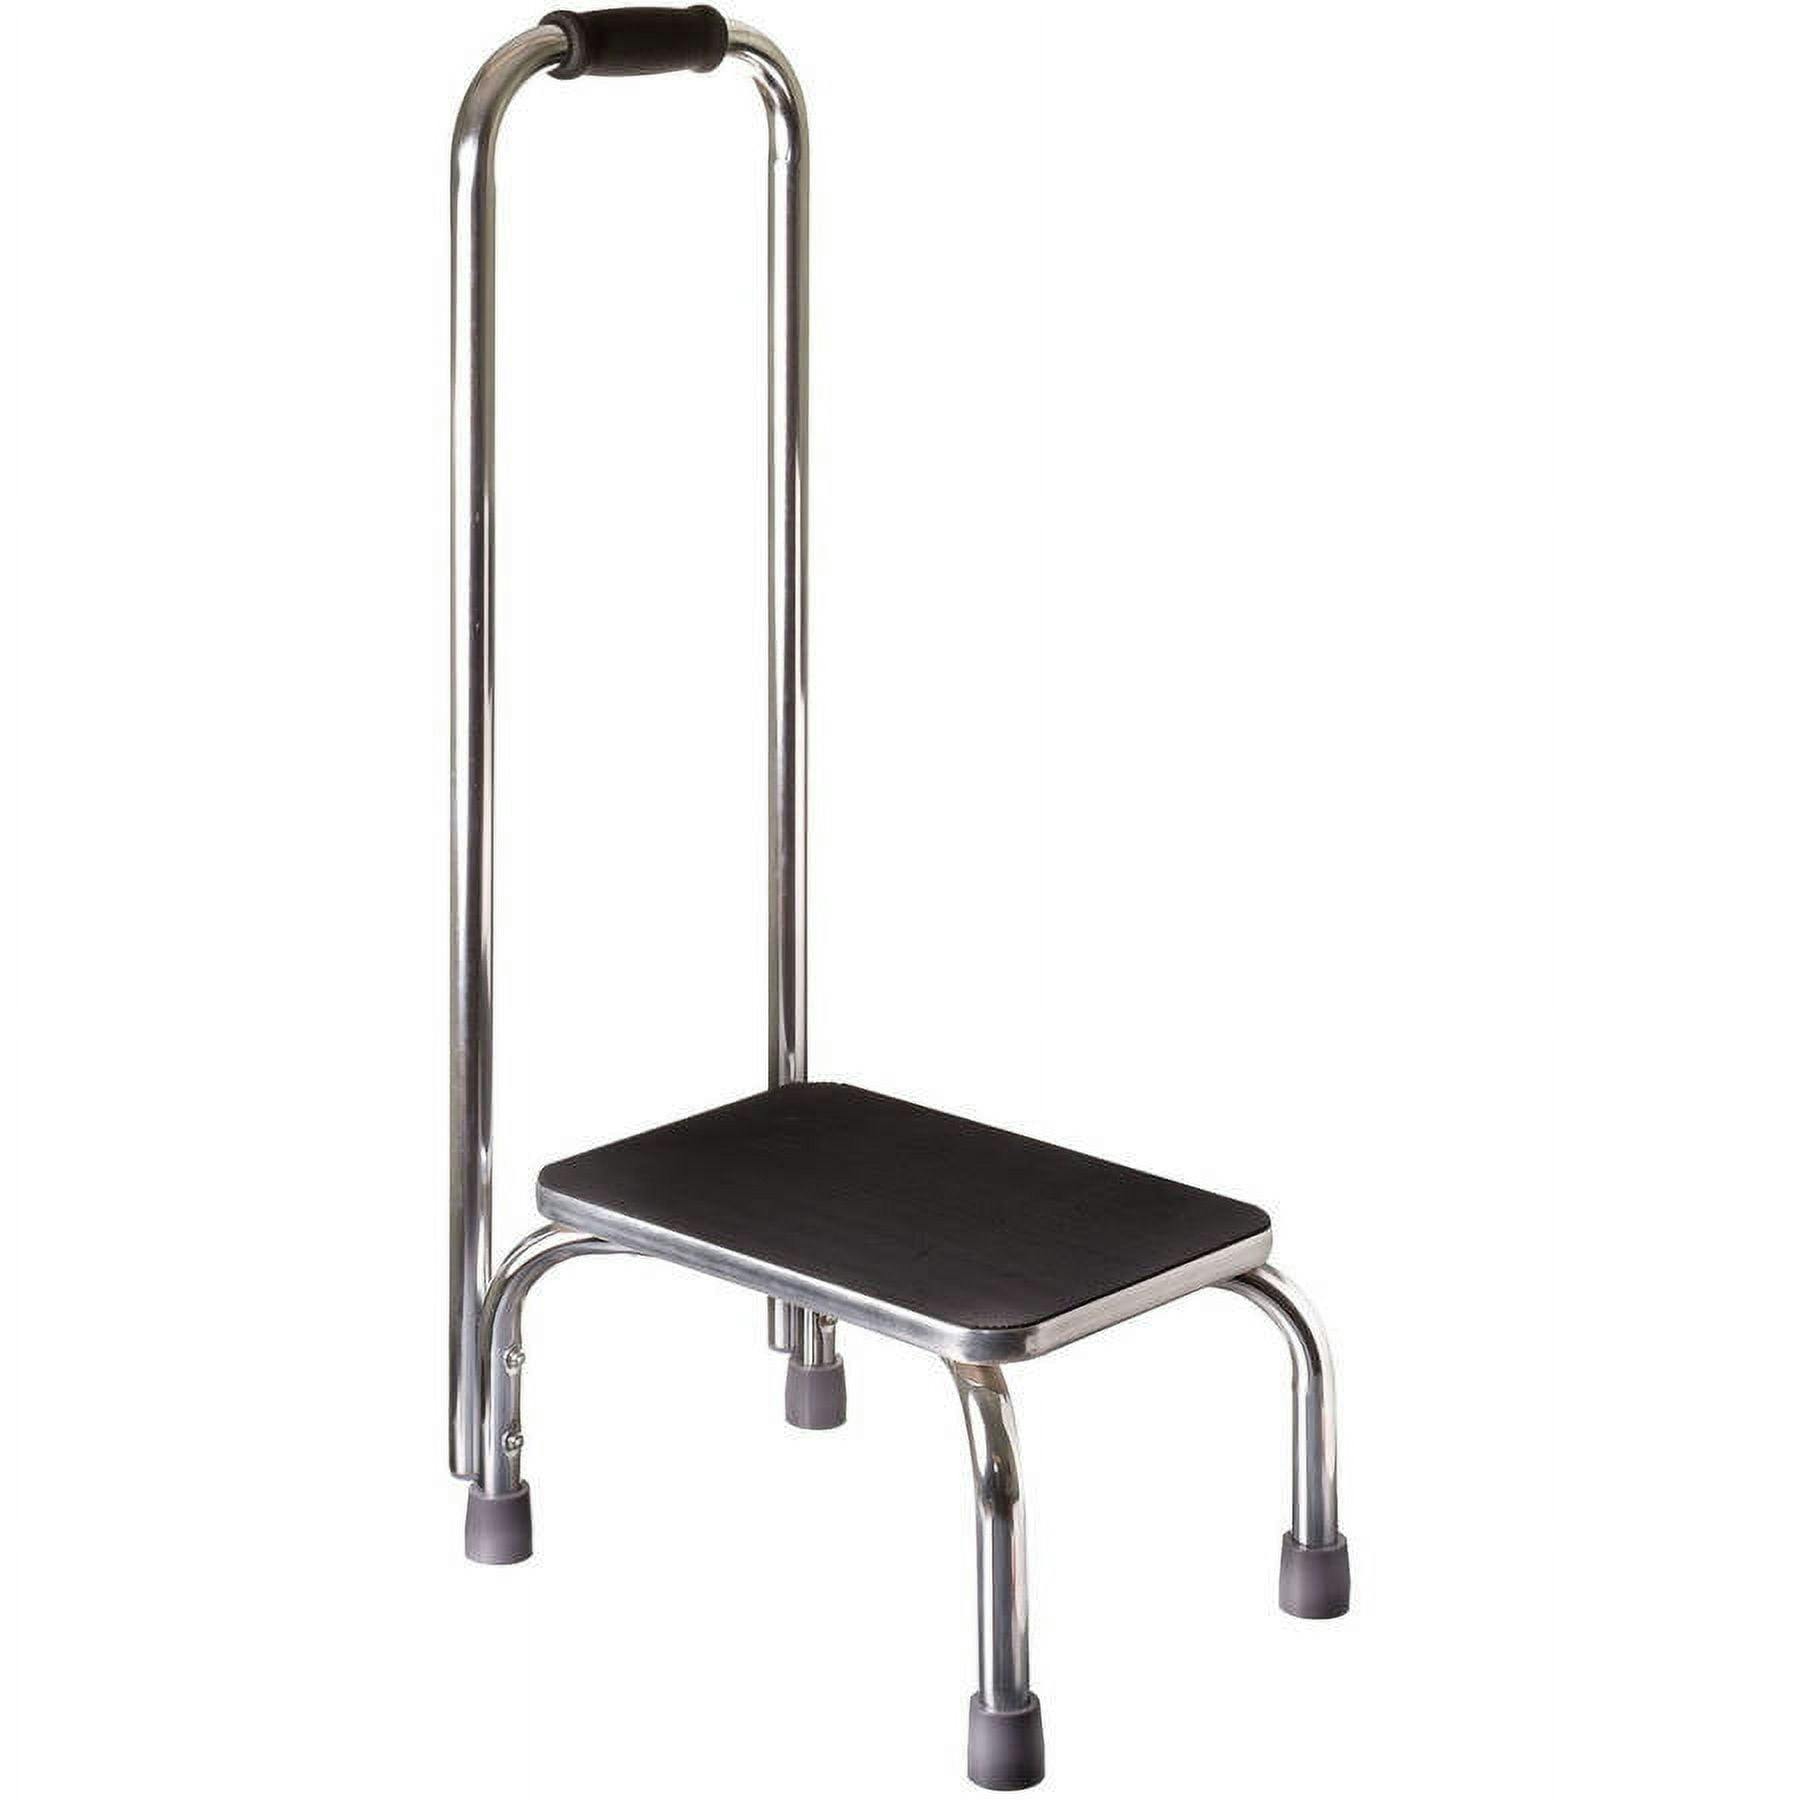 Chrome Finish Step Stool with Handle for Safety and Stability